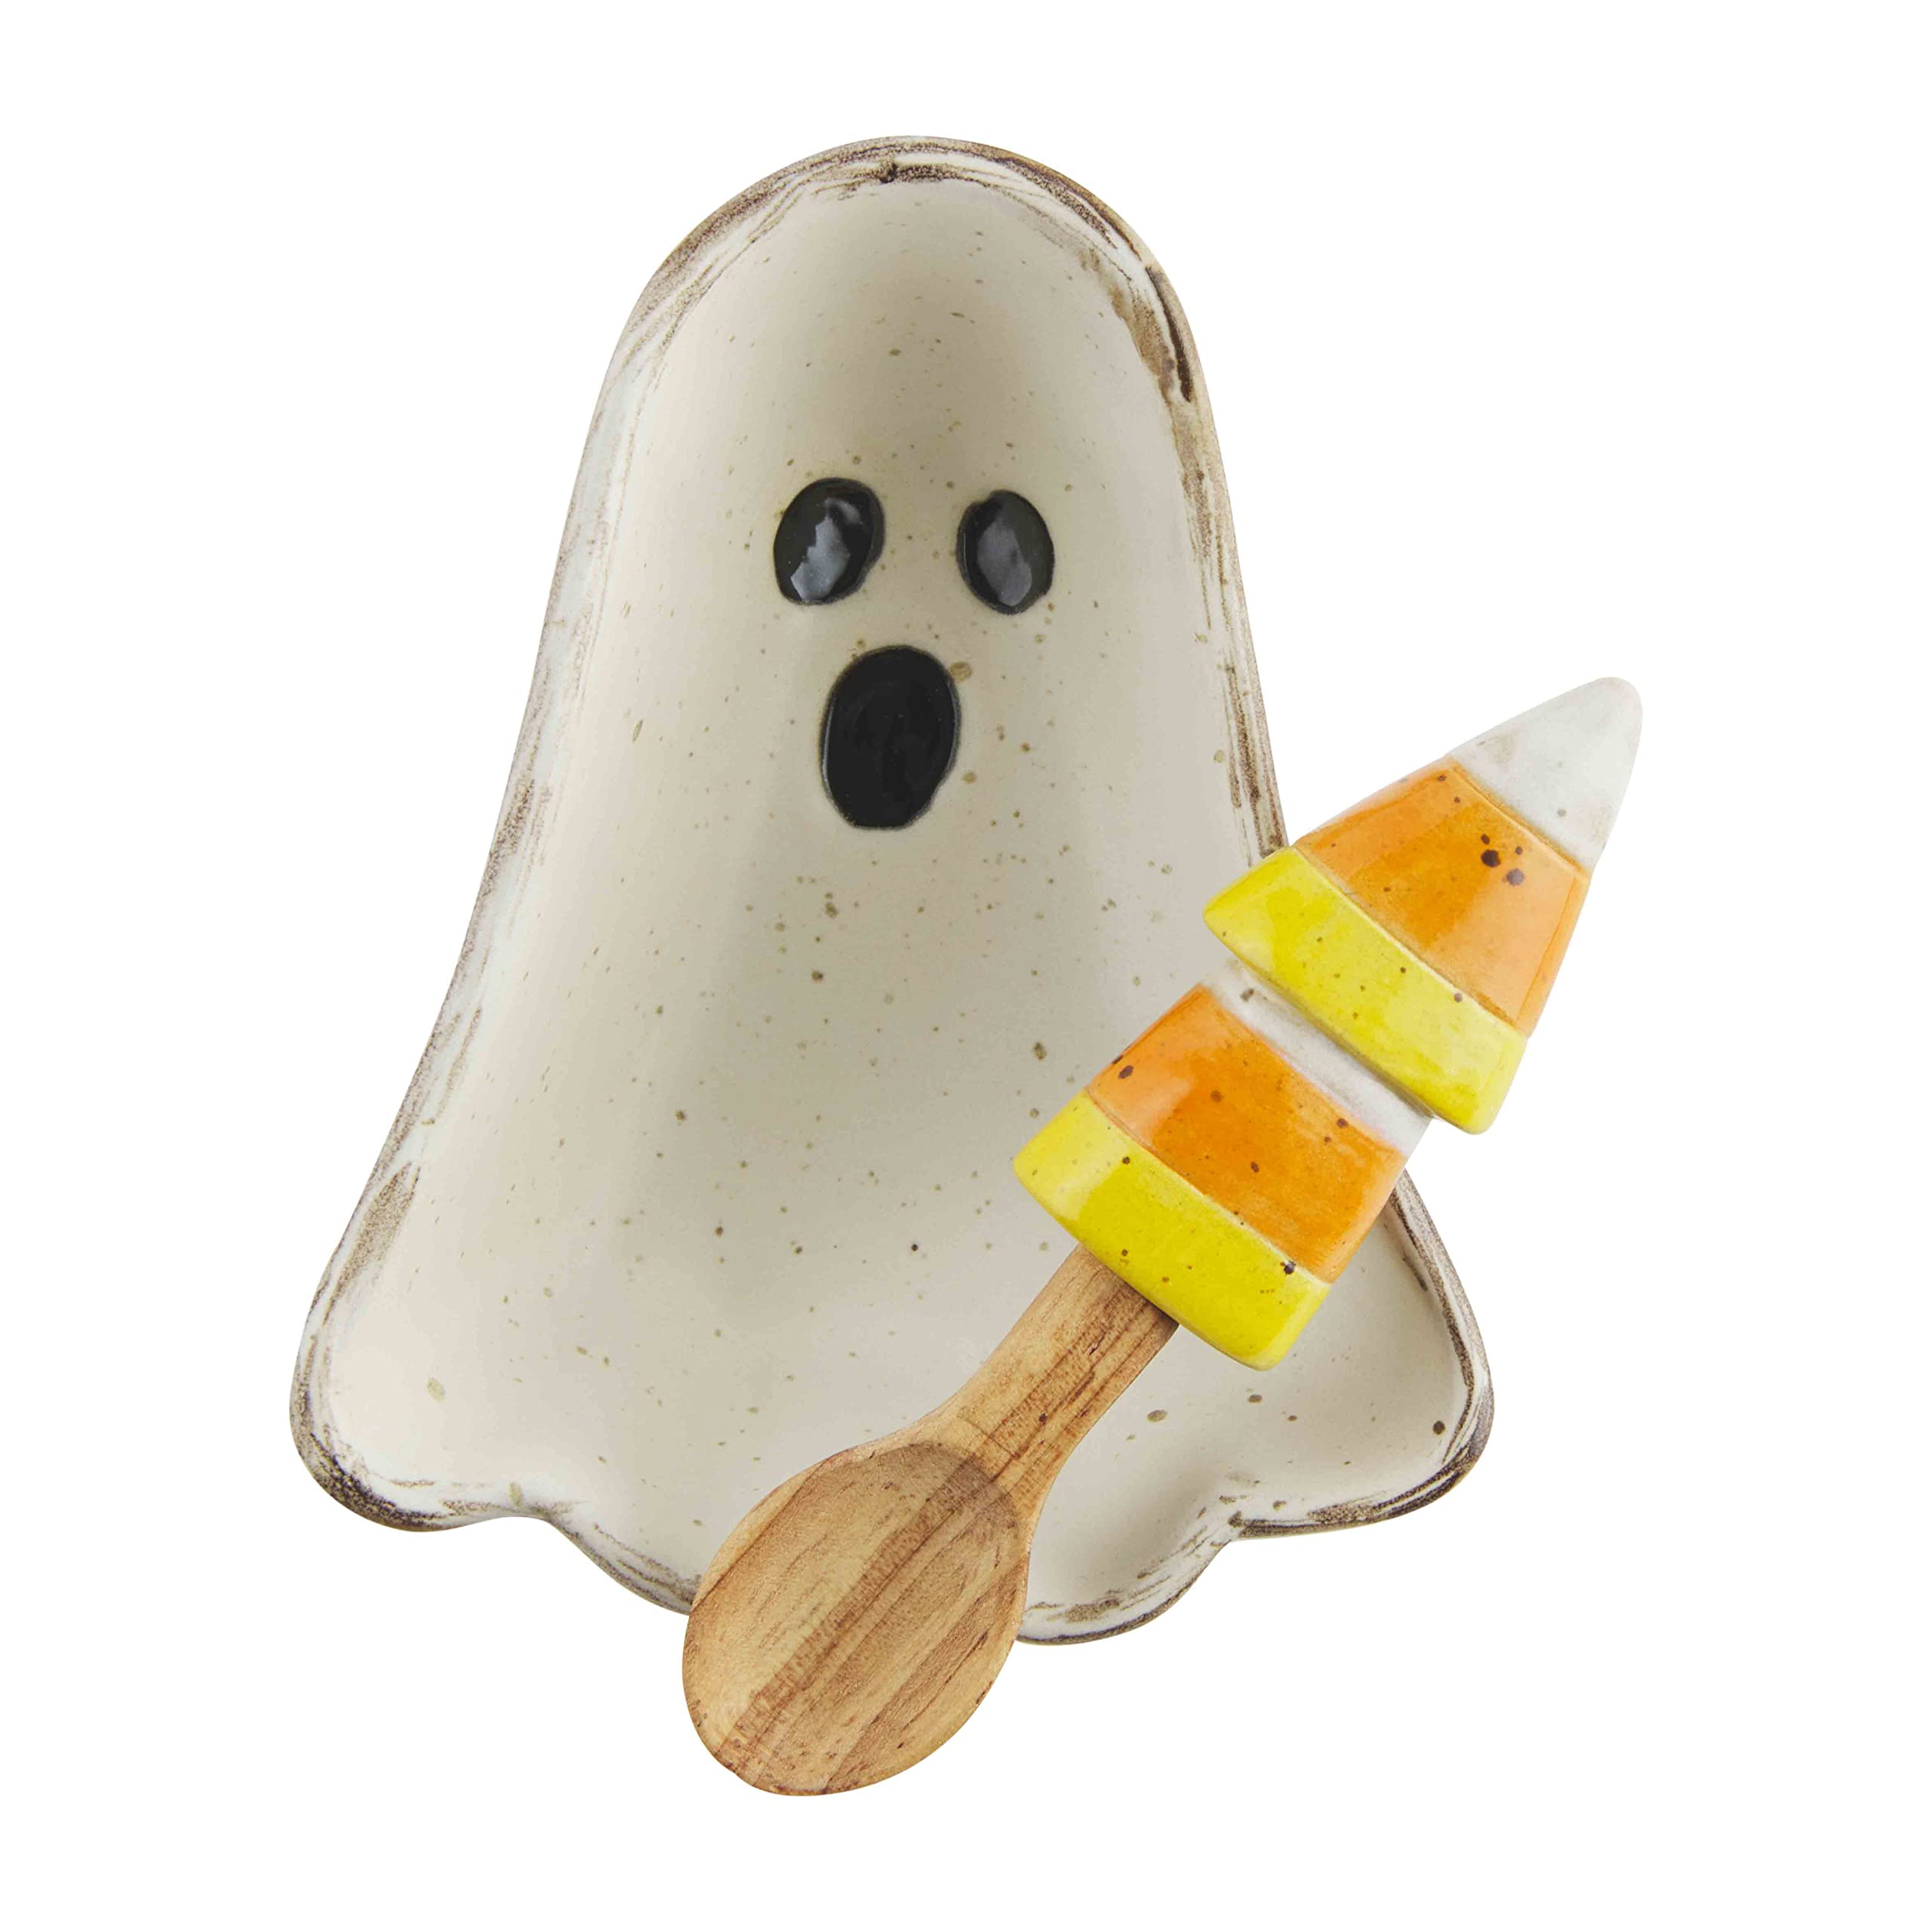 Mud Pie Shaped Candy Bowl Set, 4.75" x 3.8", Ghost